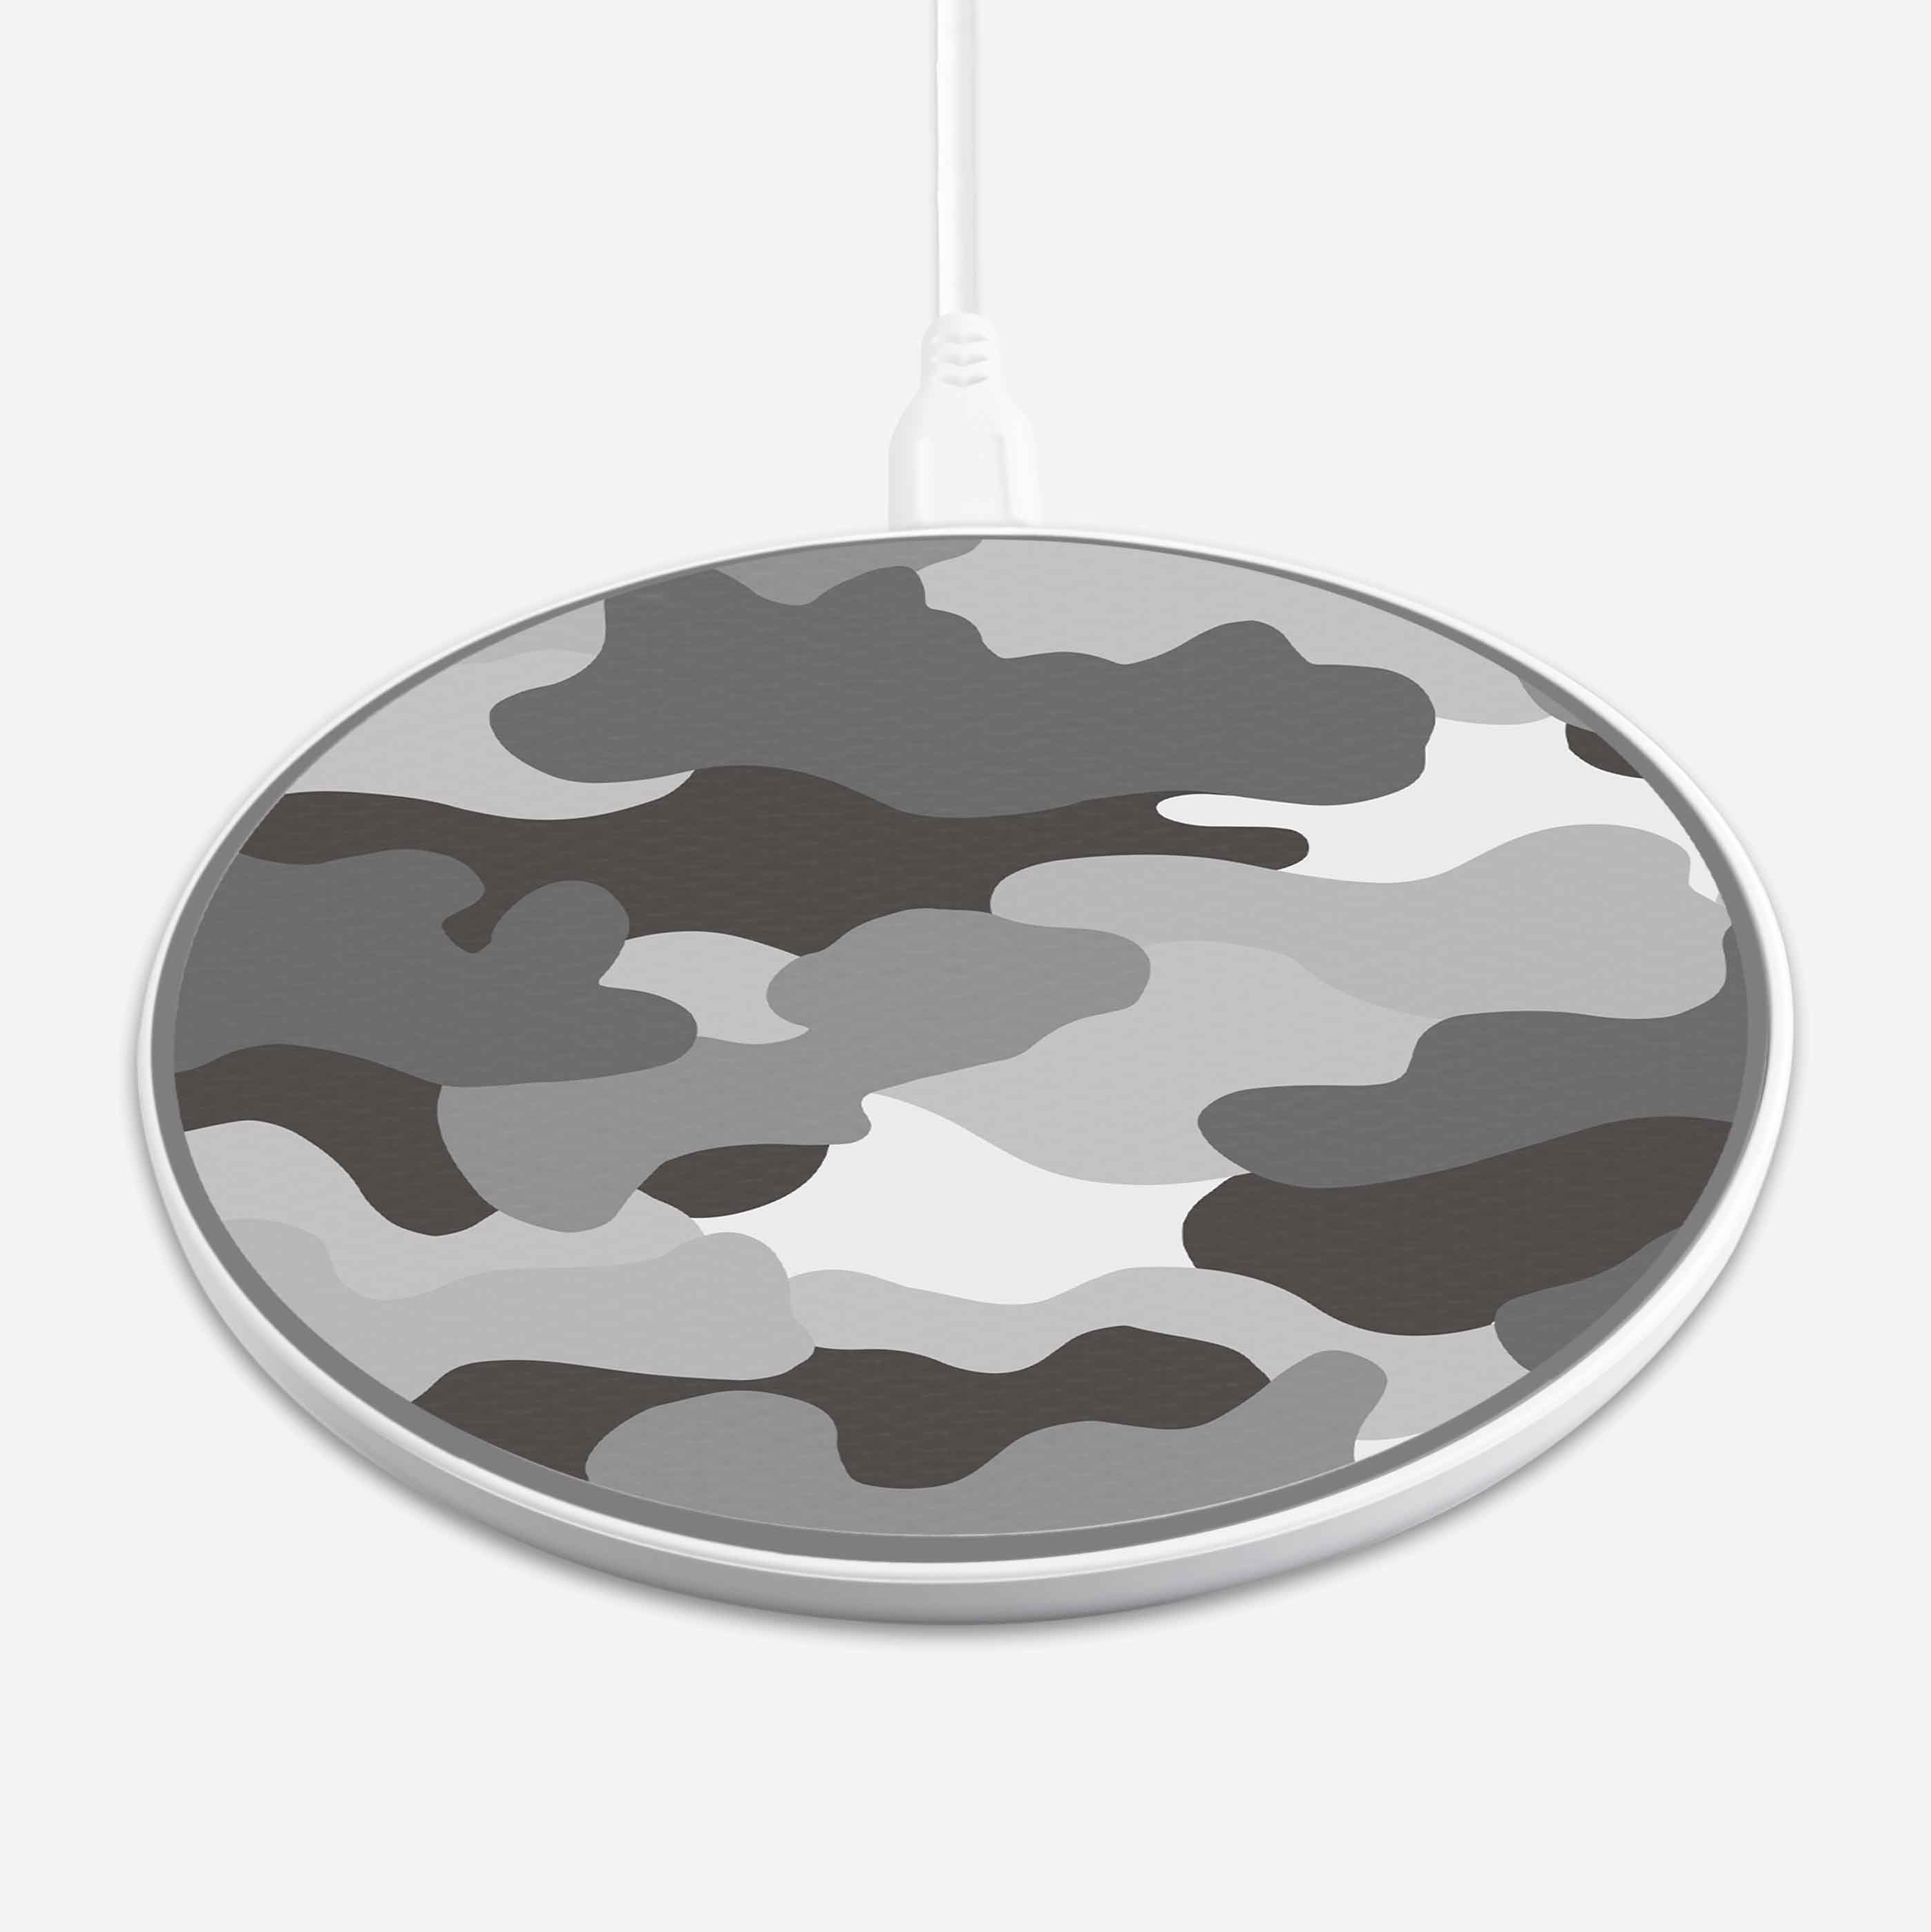 Wireless Charging Pad - Grey Camo Design (Front View)